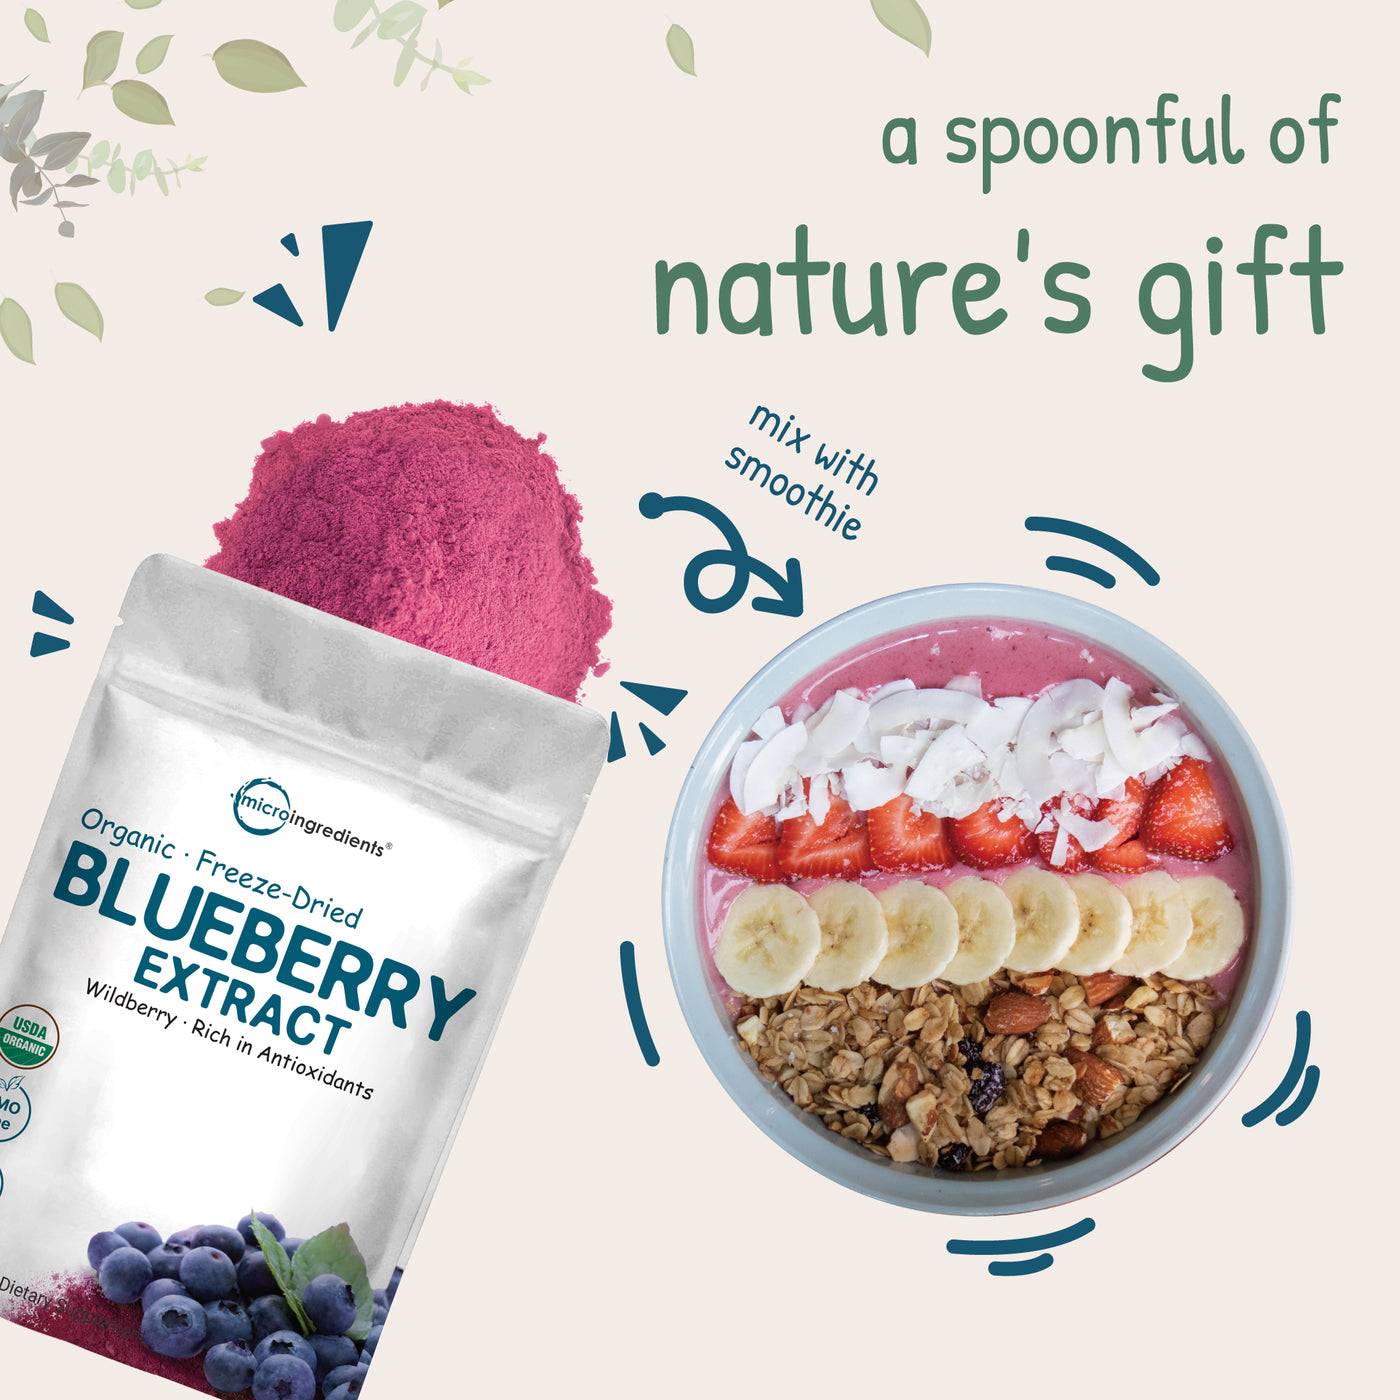 Organic Blueberry Powder, 6 Ounces Nature's Gift